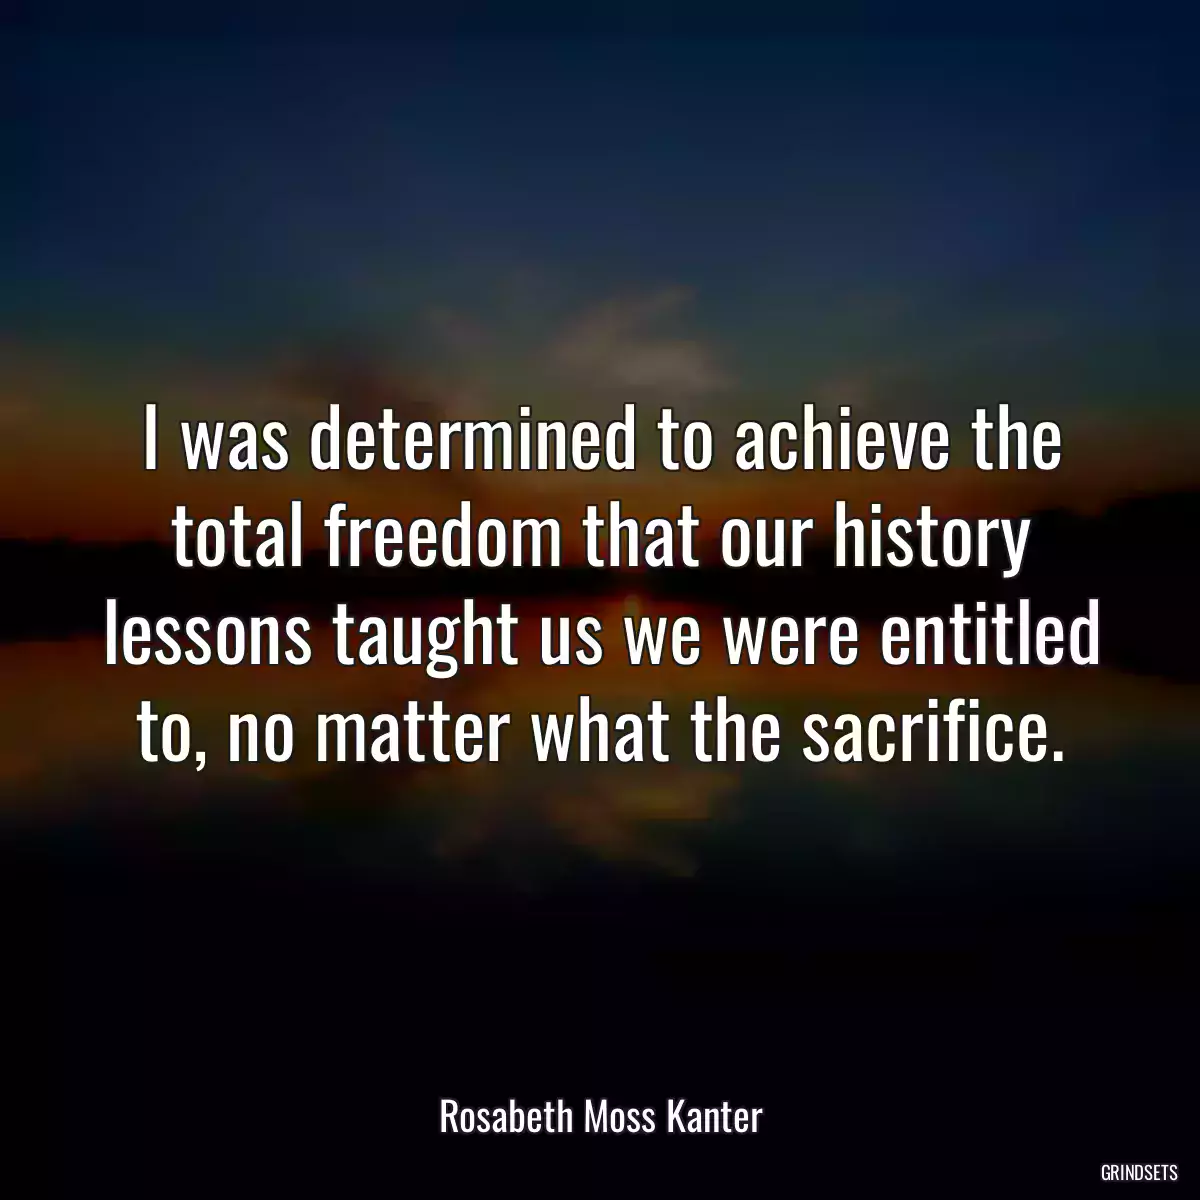 I was determined to achieve the total freedom that our history lessons taught us we were entitled to, no matter what the sacrifice.